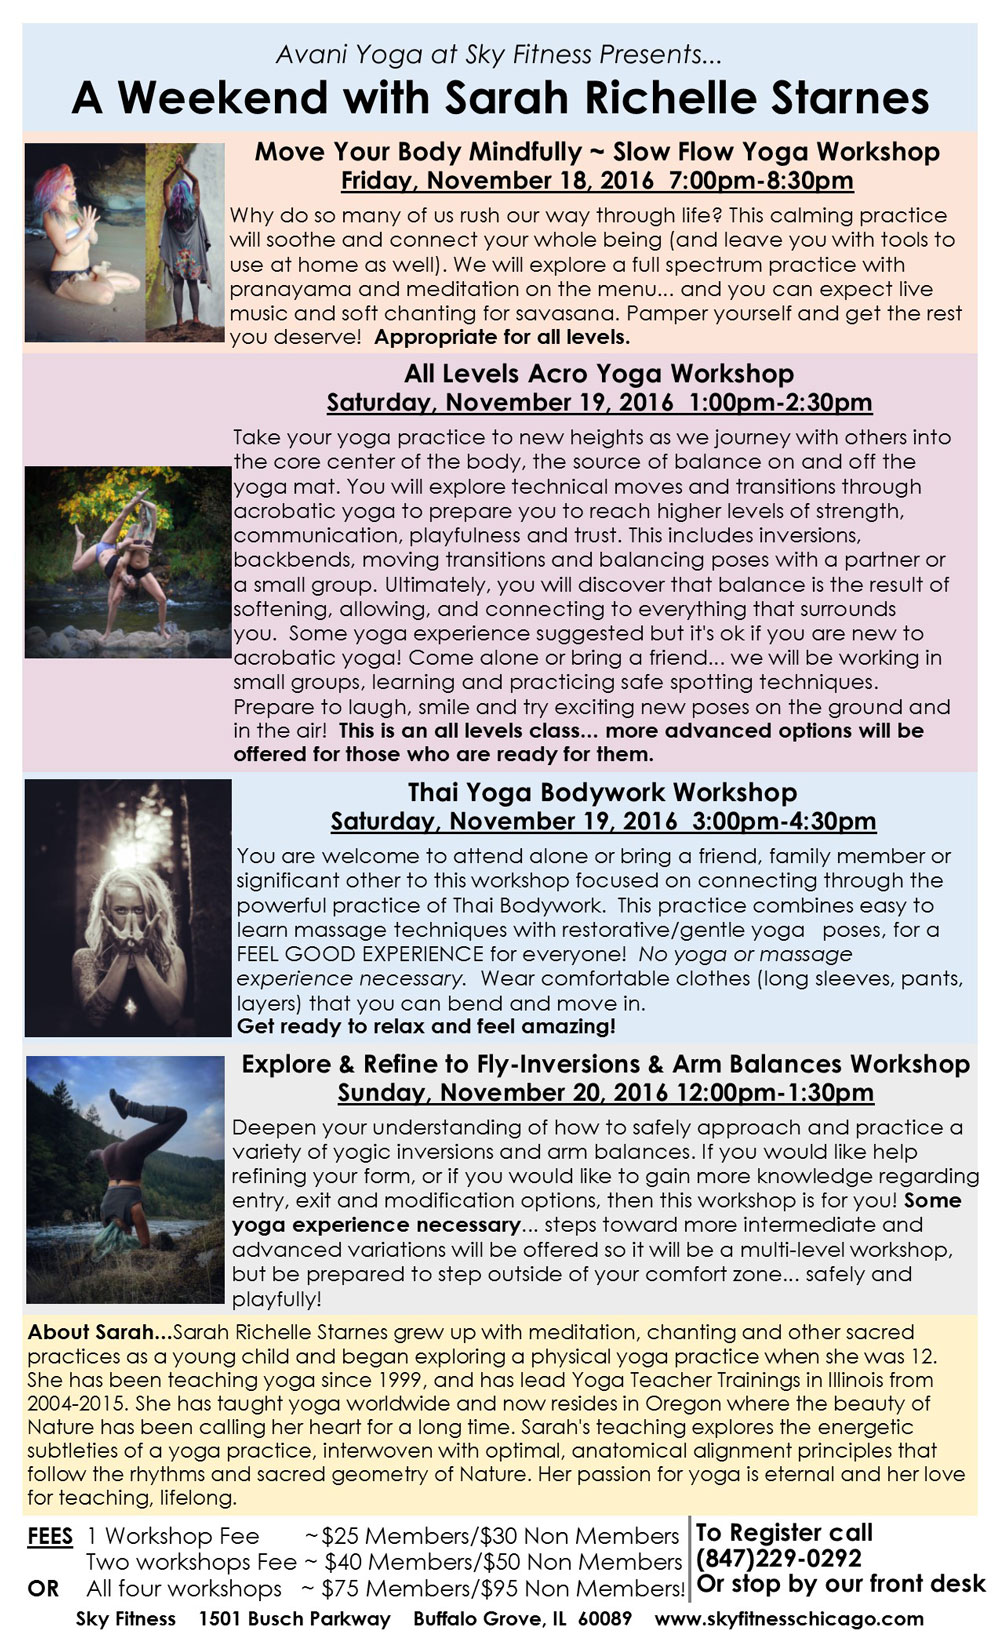 Sky Fitness Chicago - Blog - Events and Updates - A Weekend with Sarah Richelle Starnes - Workshop Details